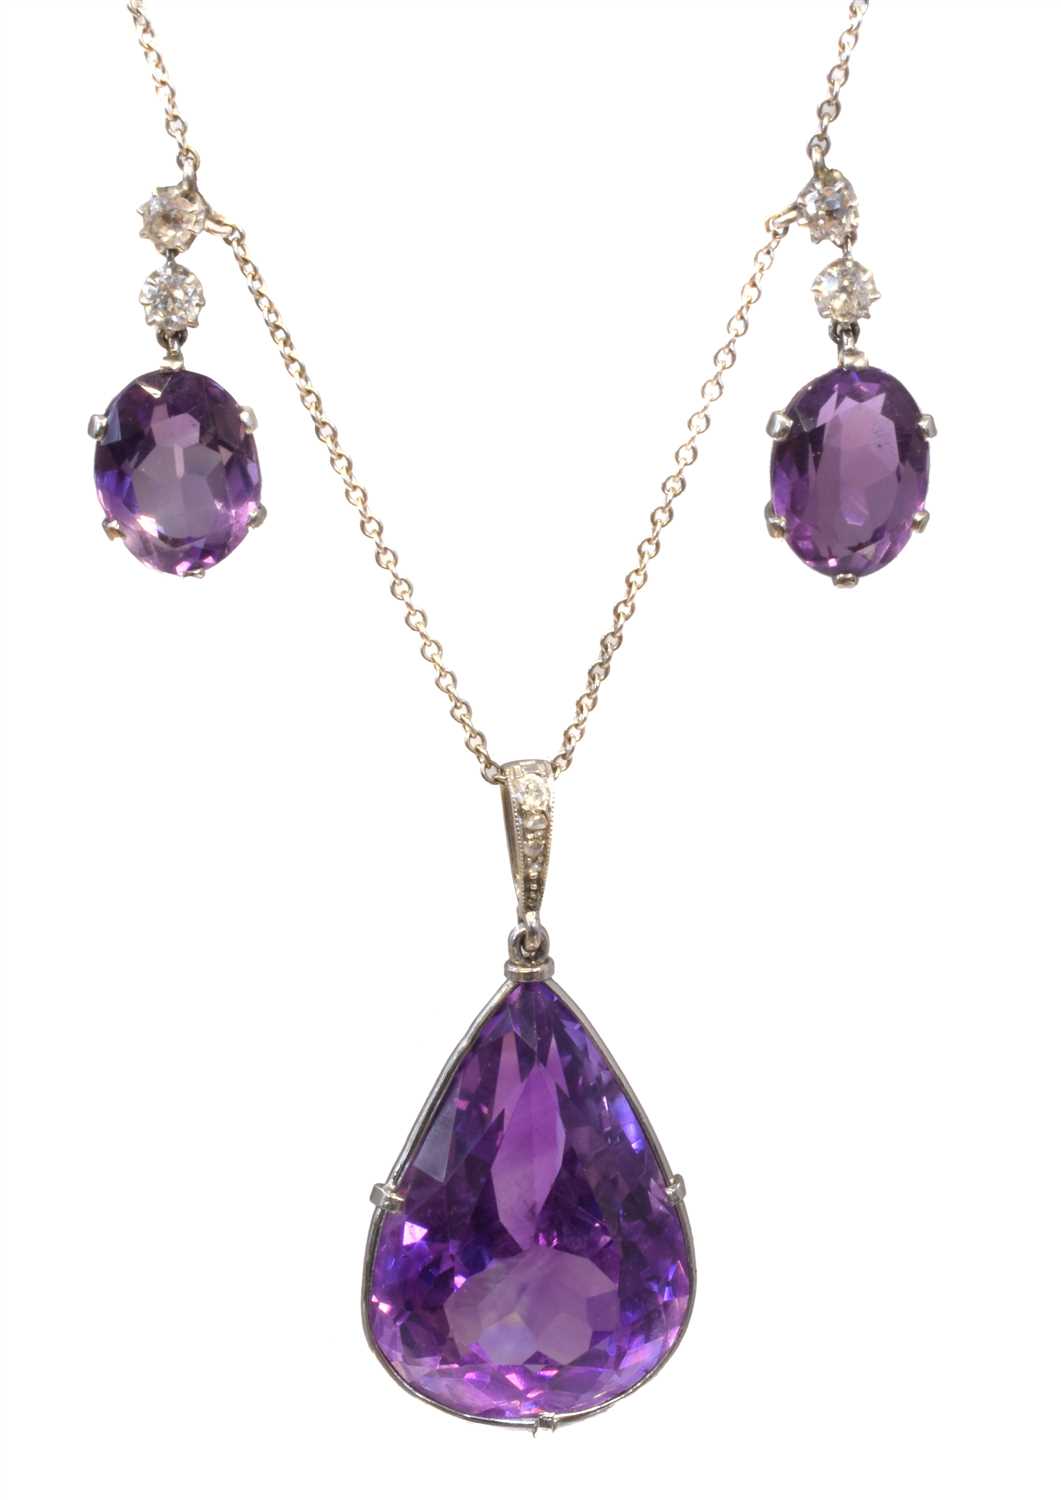 Lot 142 - An amethyst and diamond pendant necklace retailed by Wartski